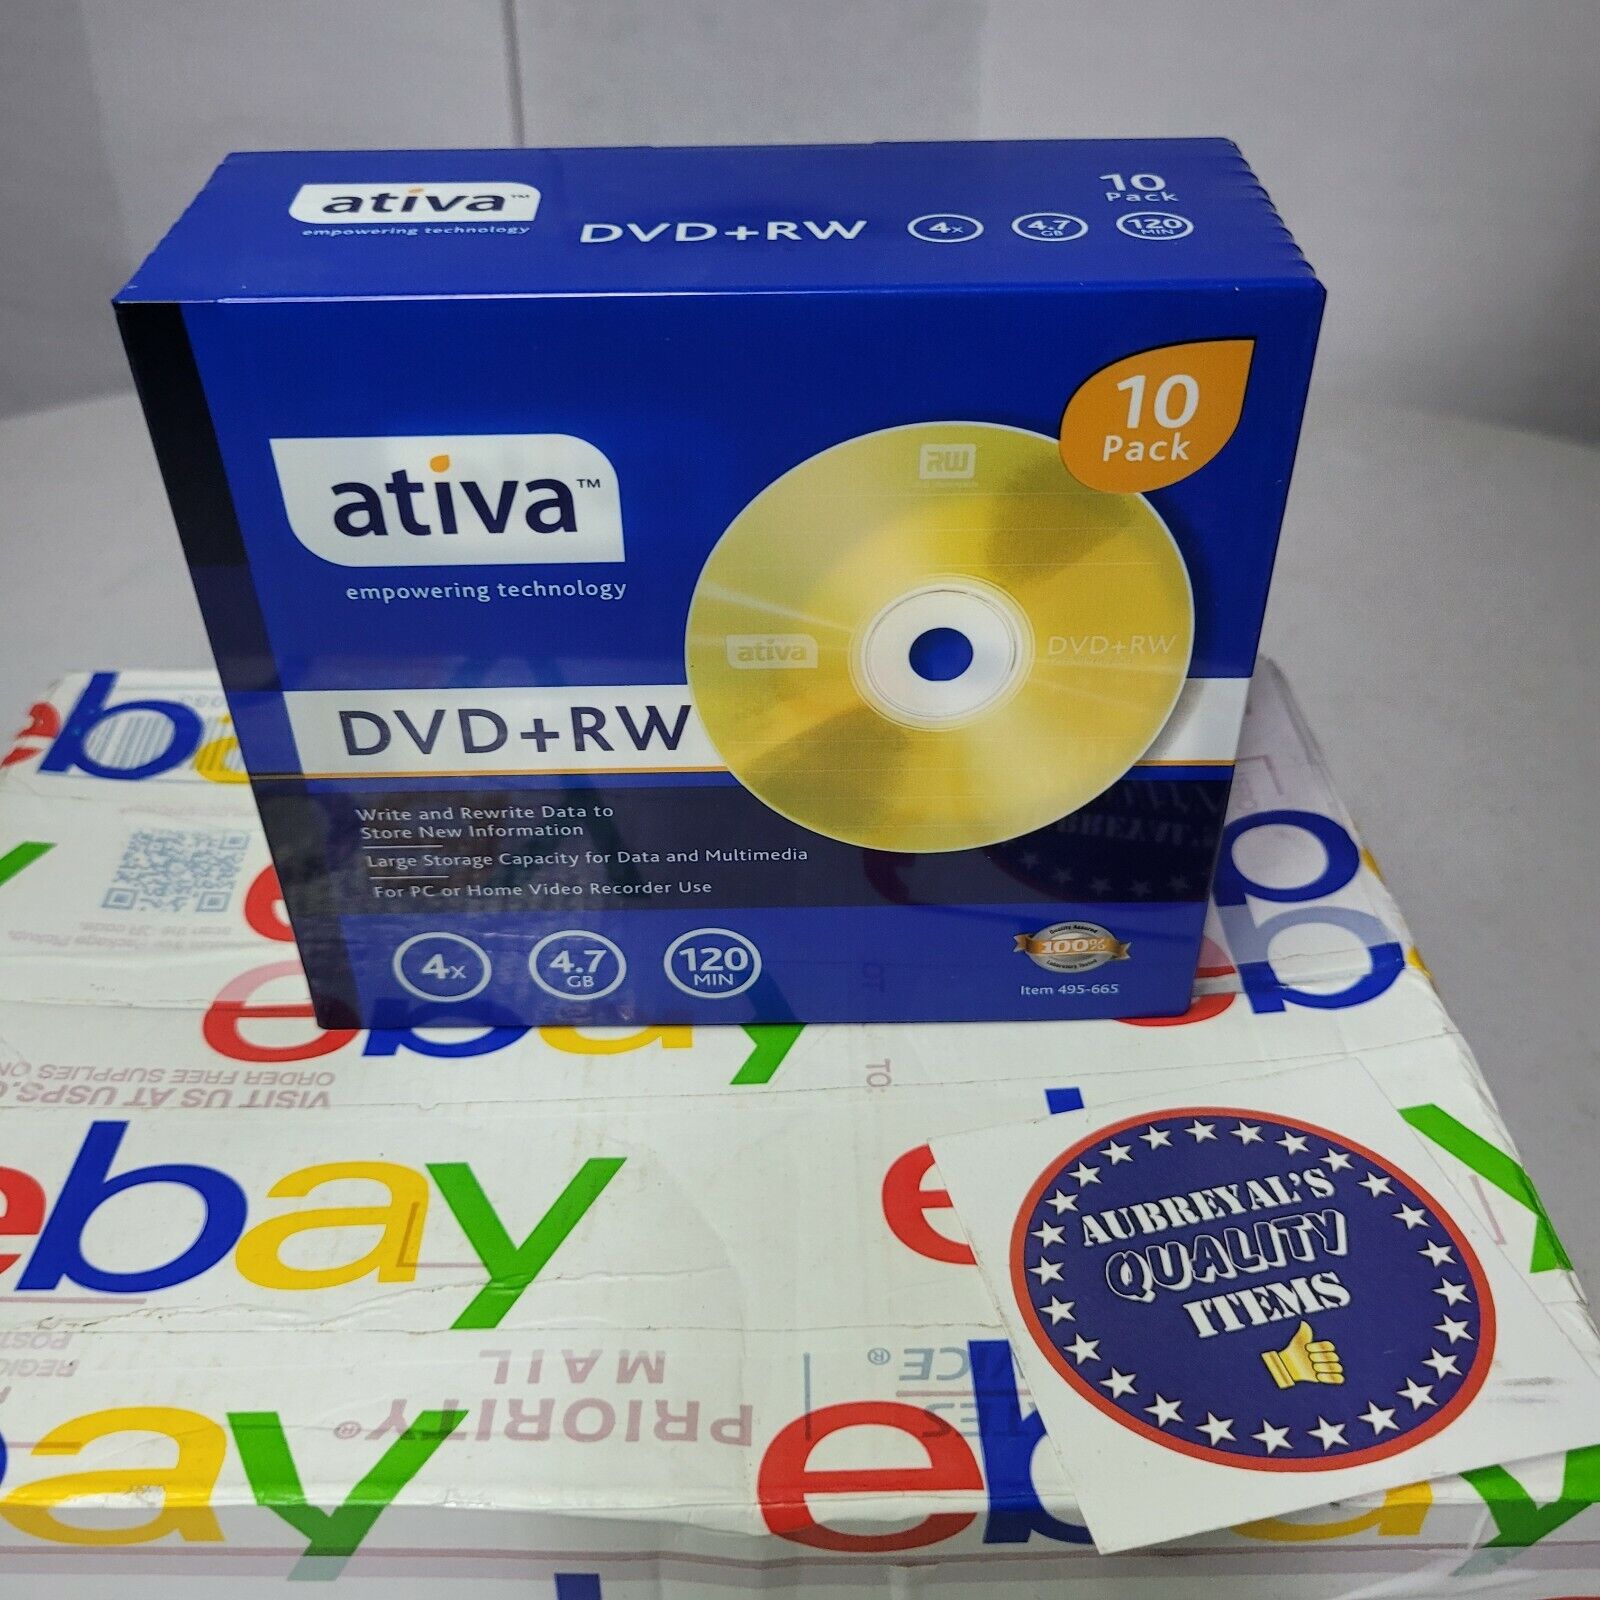 10 Pack Ativa DVD+RW Large Storage Capacity for PC or Home Video Recorder Use 